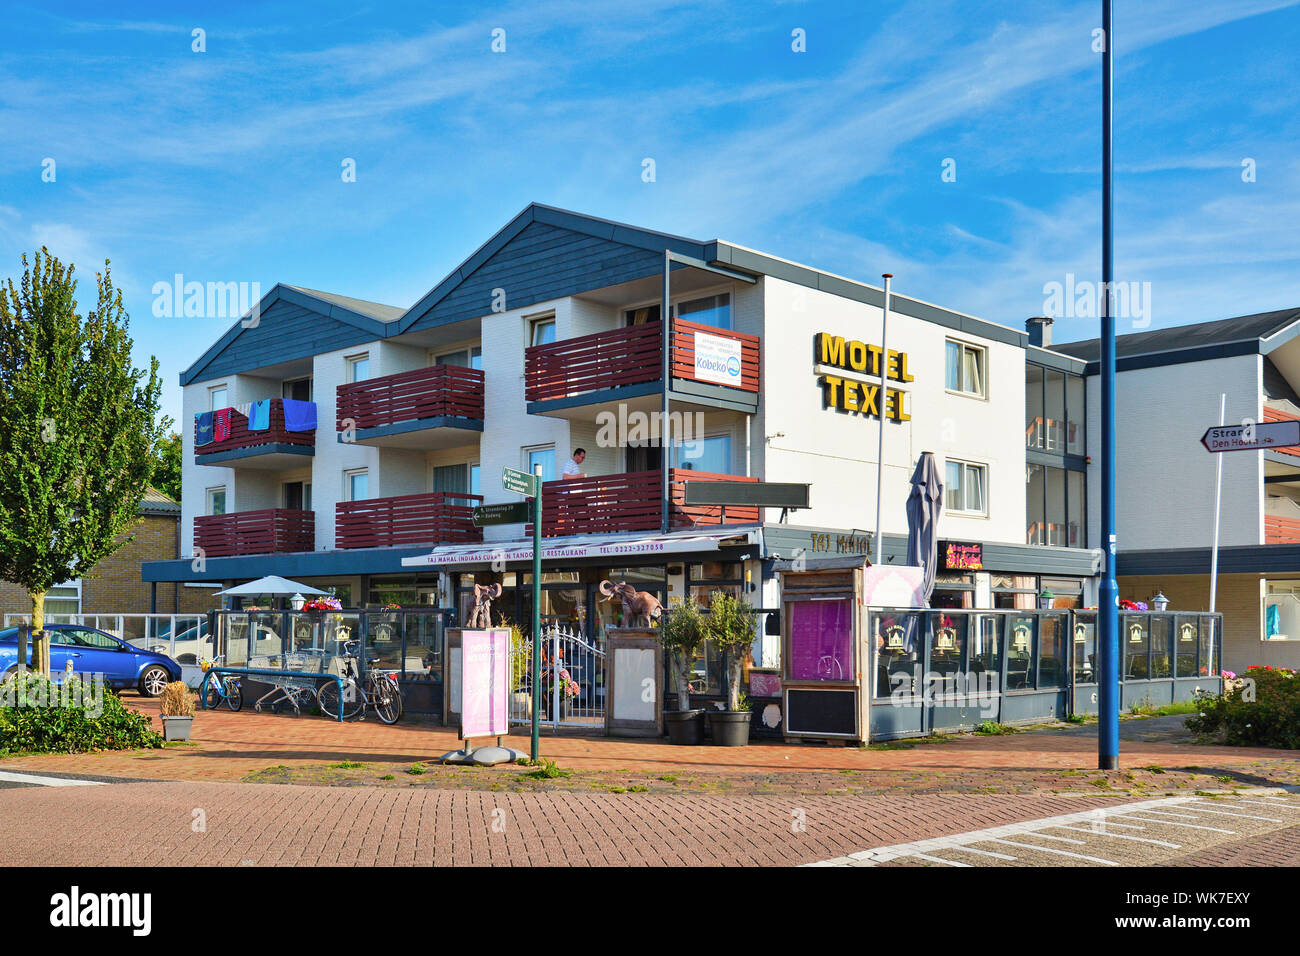 De Koog, Texel / North Netherlands - August 2019: Outside of 'Motel Texel' on a sunny summer day Stock Photo